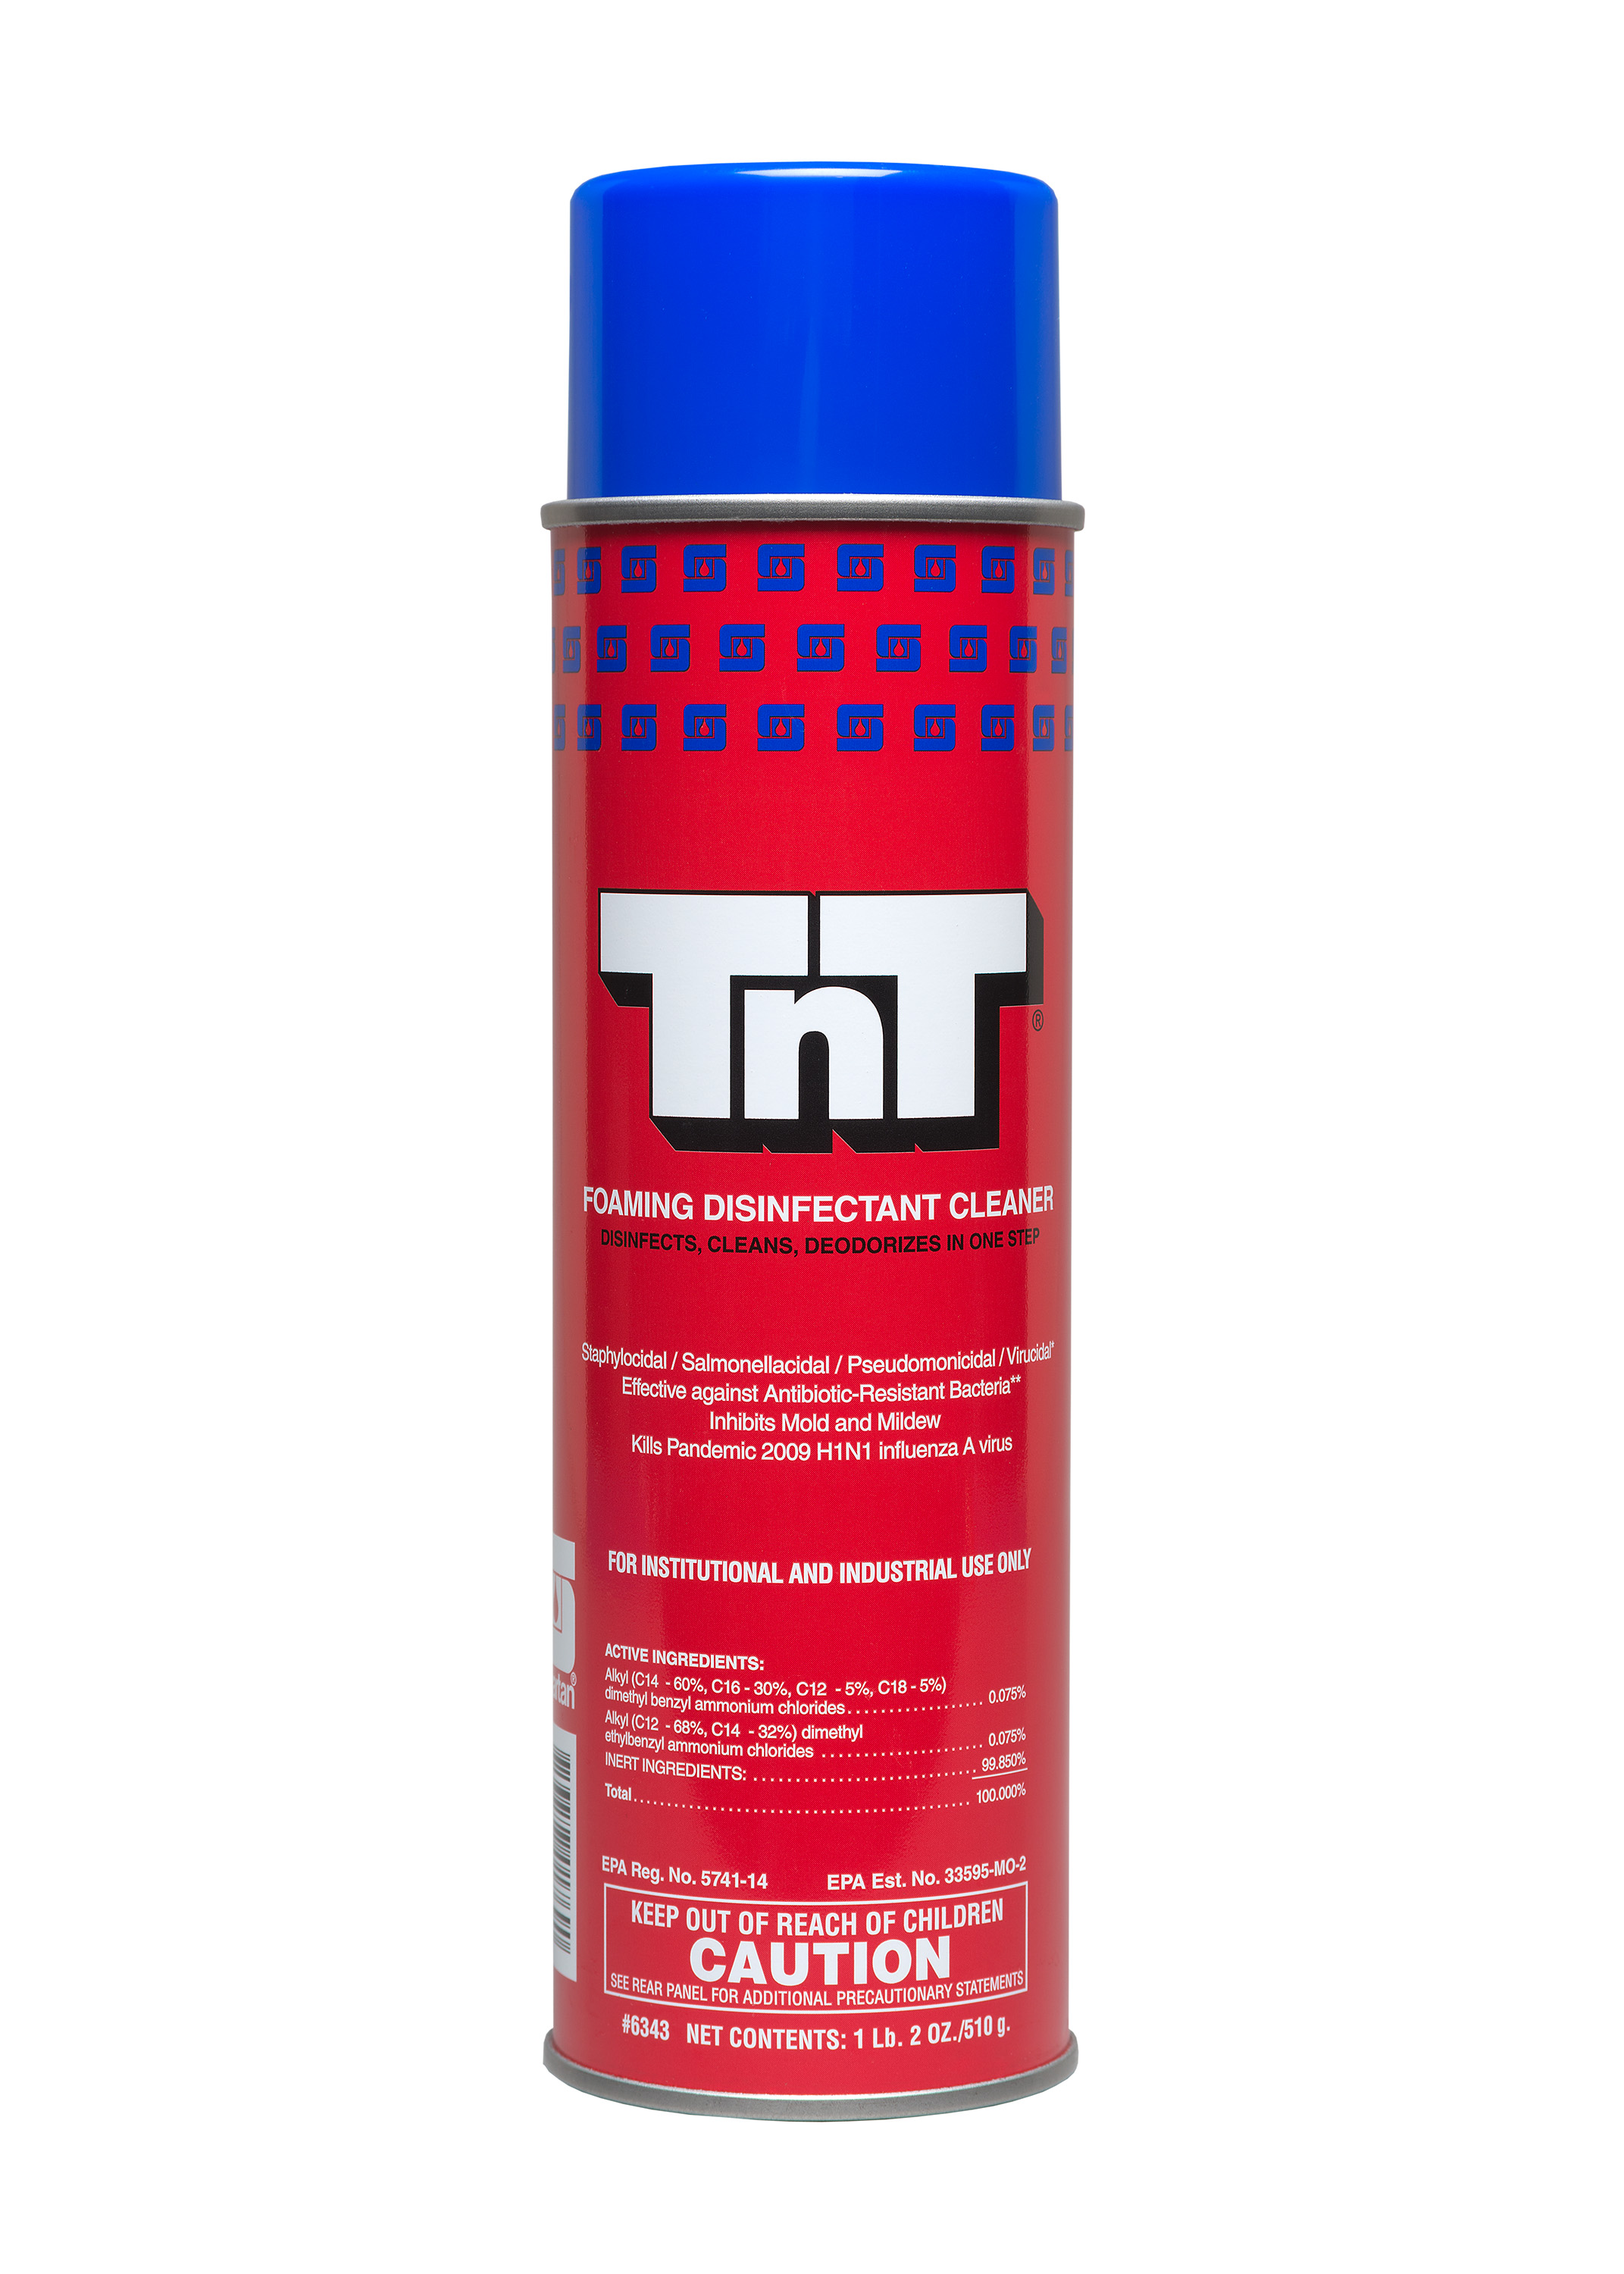 TNT FOAMING DISINFECTANT CLEANER, 18 OZ AEROSOL CAN